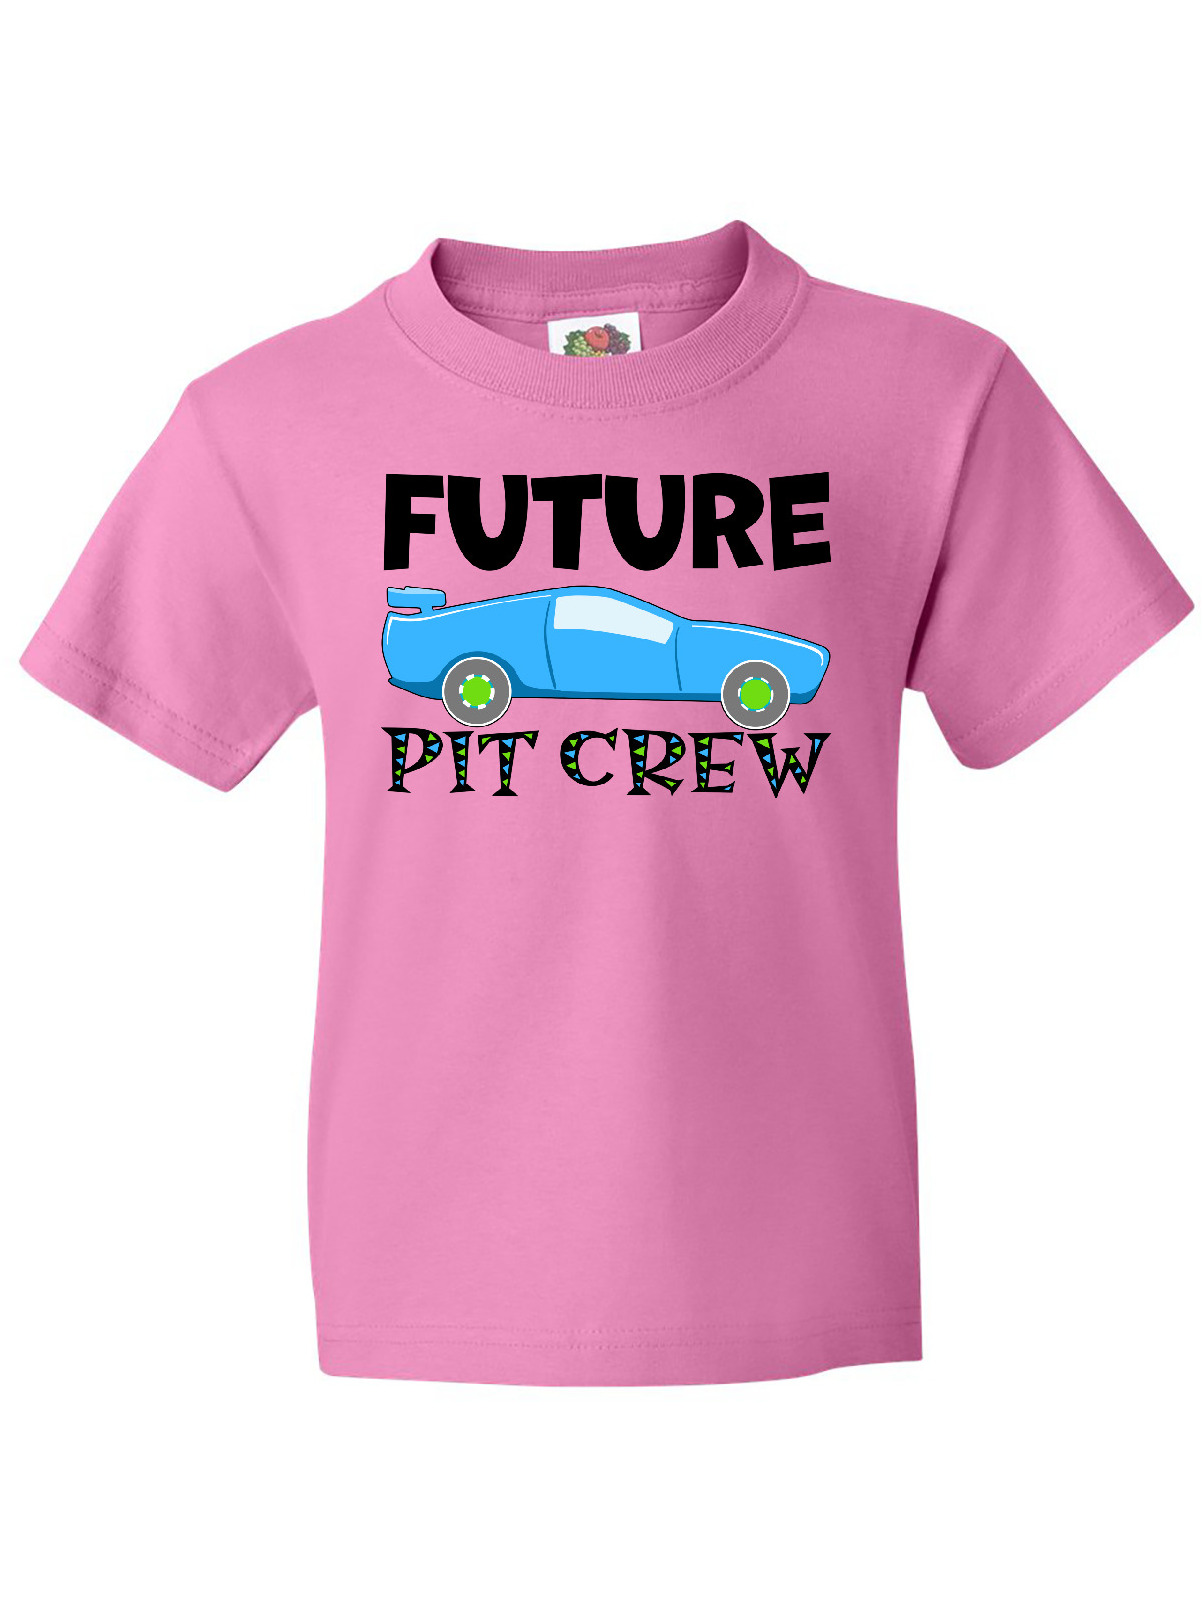 Inktastic Future Pit Crew Blue Race Car Youth T-Shirt - image 1 of 4